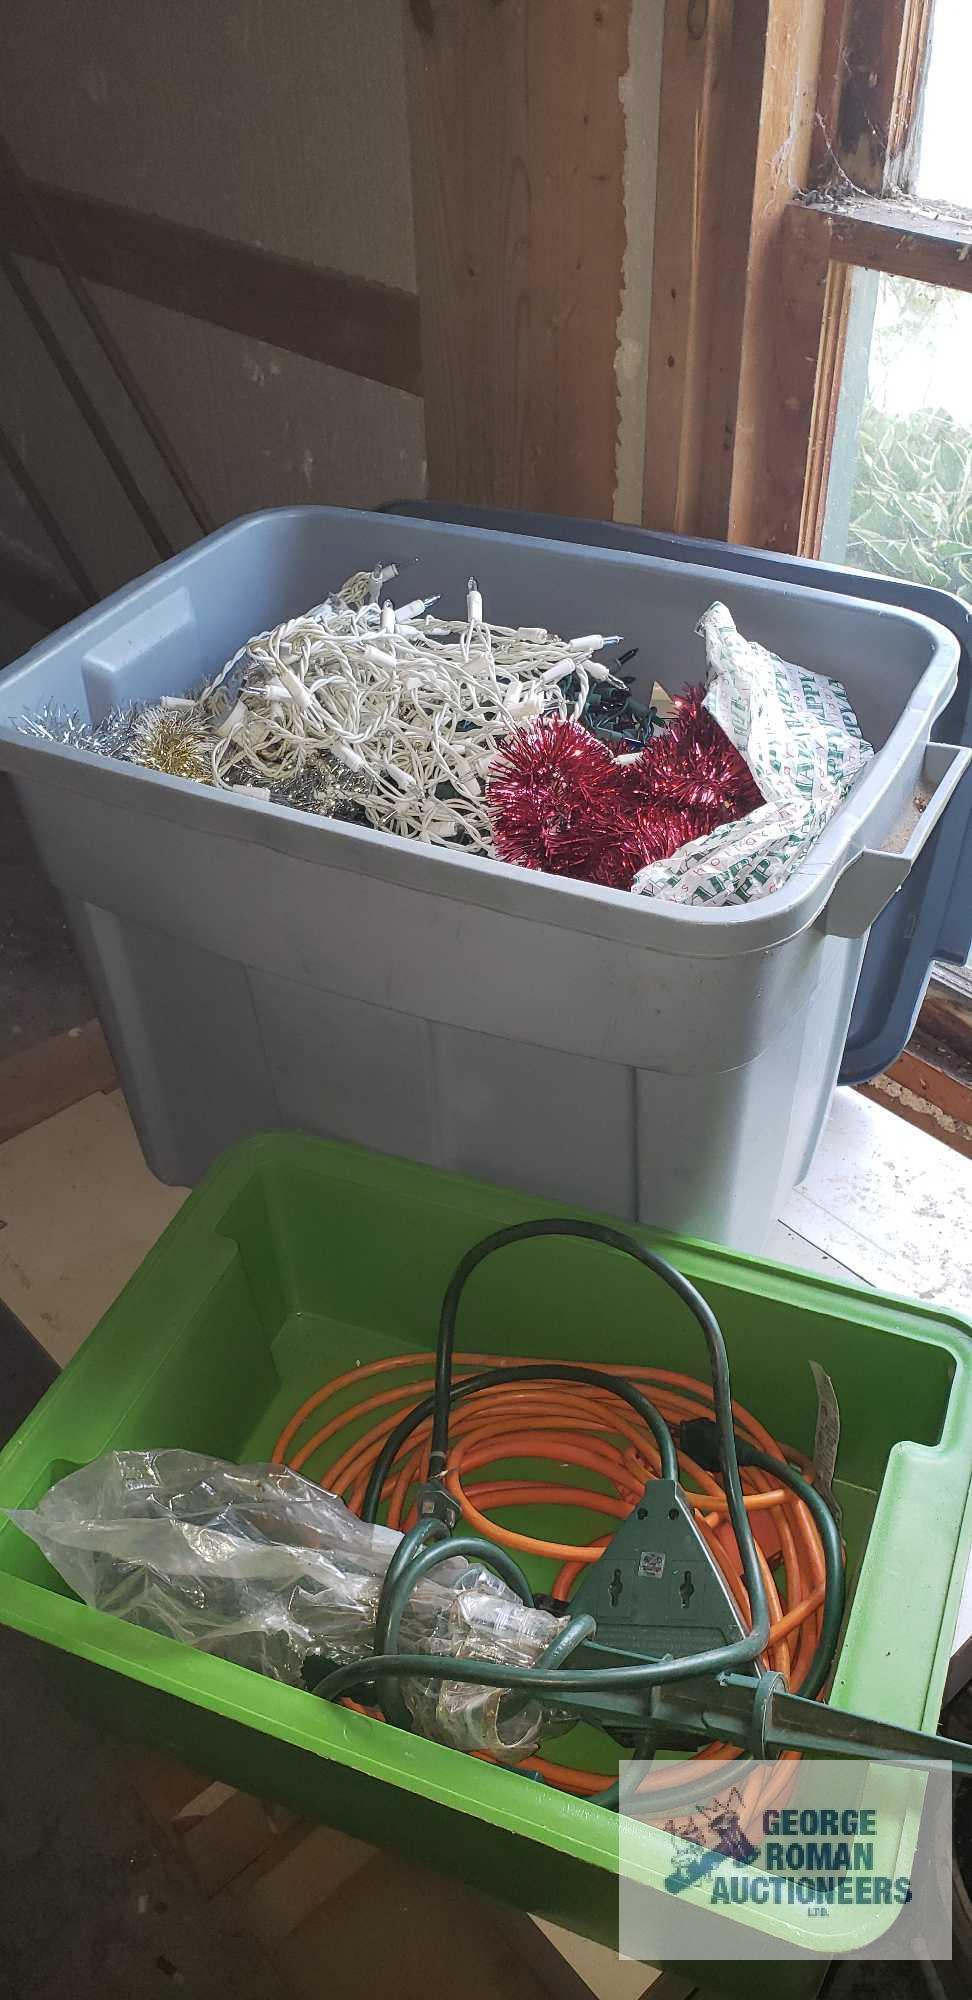 Tote of Christmas lights and garland and other plastic bin with electric cords